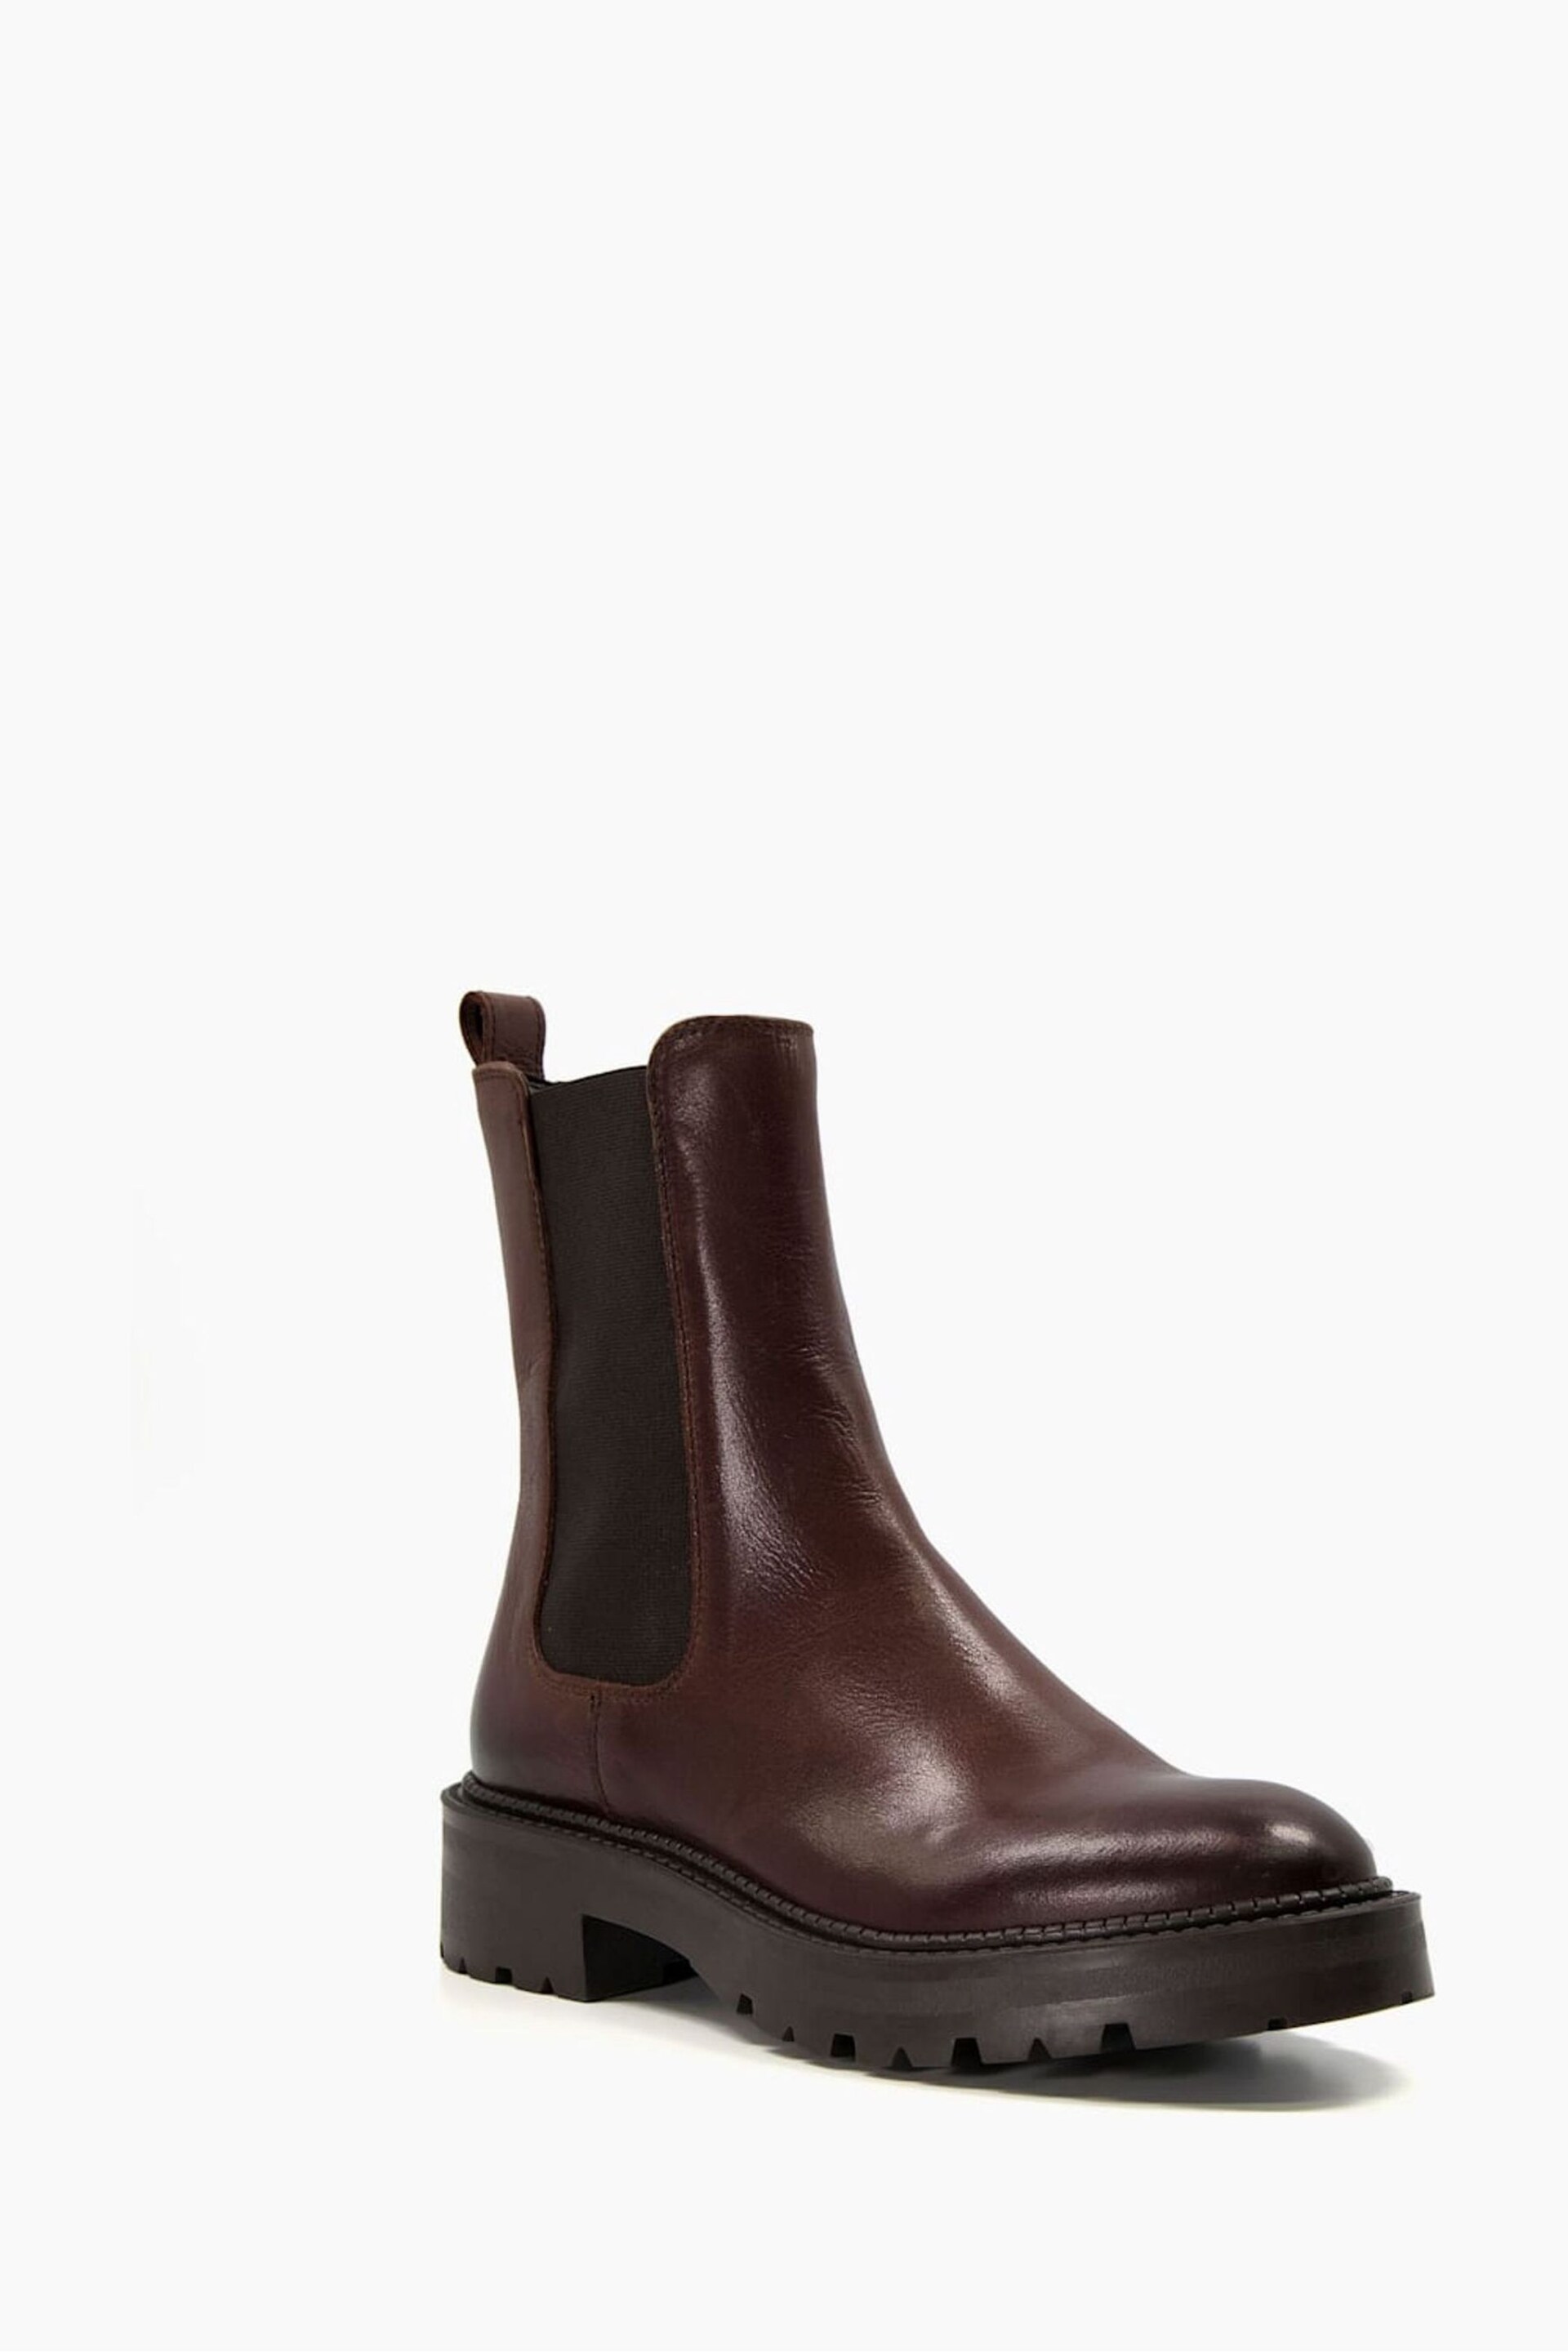 Dune London Brown Picture Boots - Image 3 of 5